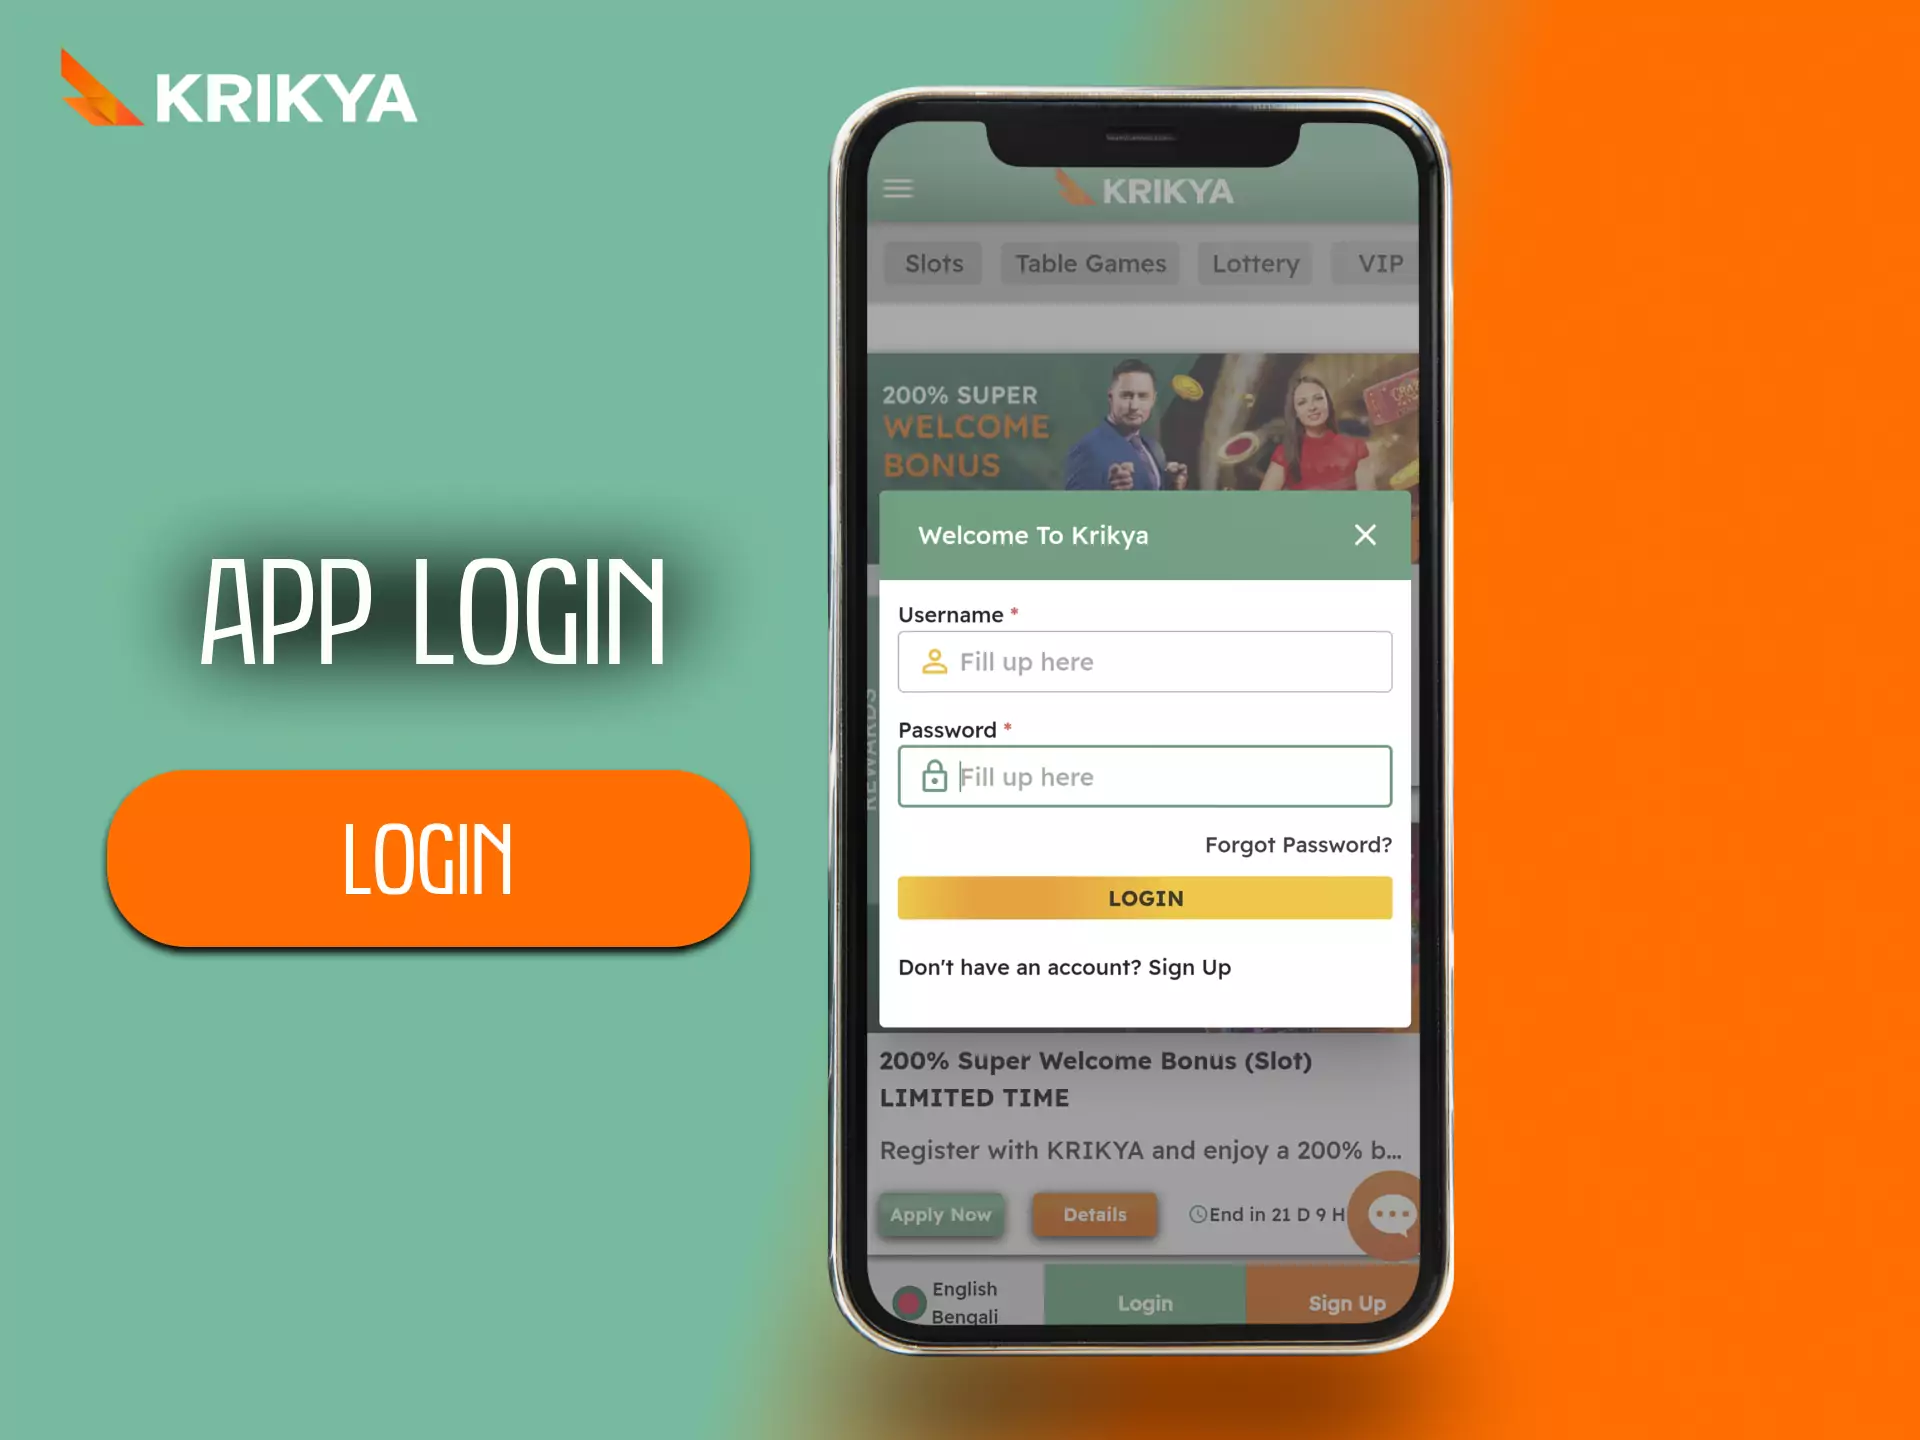 Log into your Krikya account to have access to all bonuses and features.